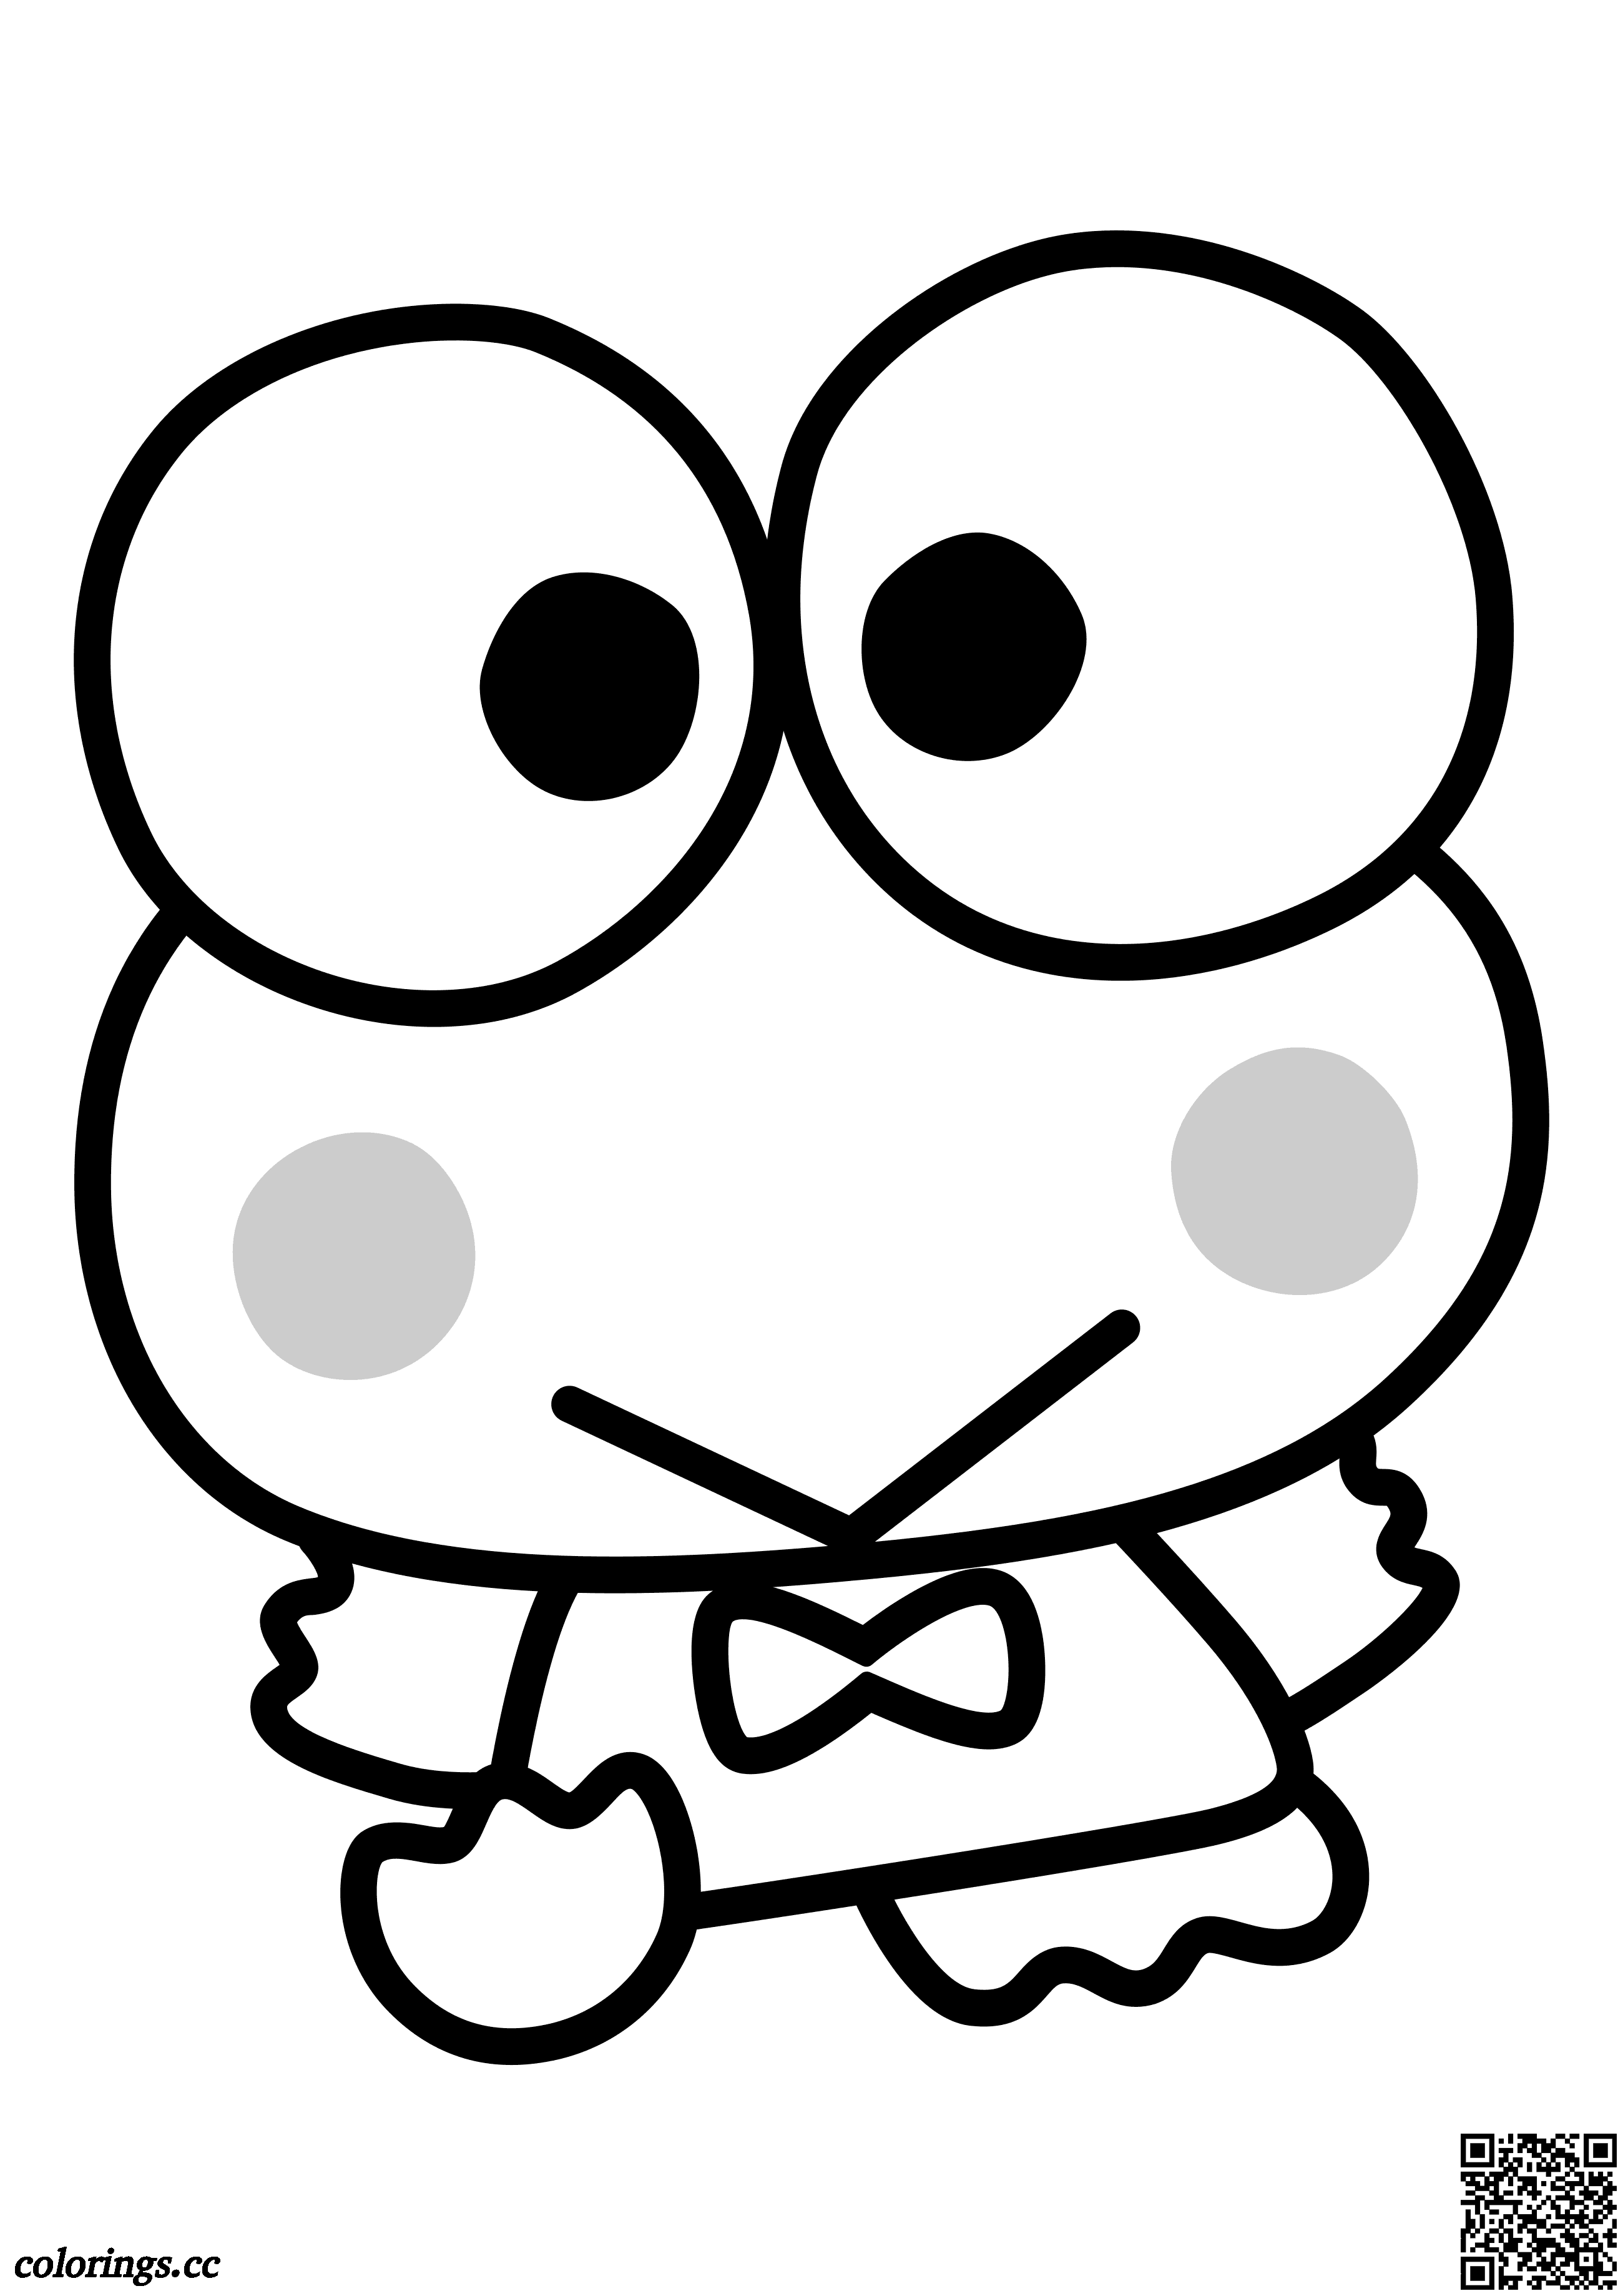 Keroppi coloring pages, Hello Kitty coloring pages - Colorings.cc